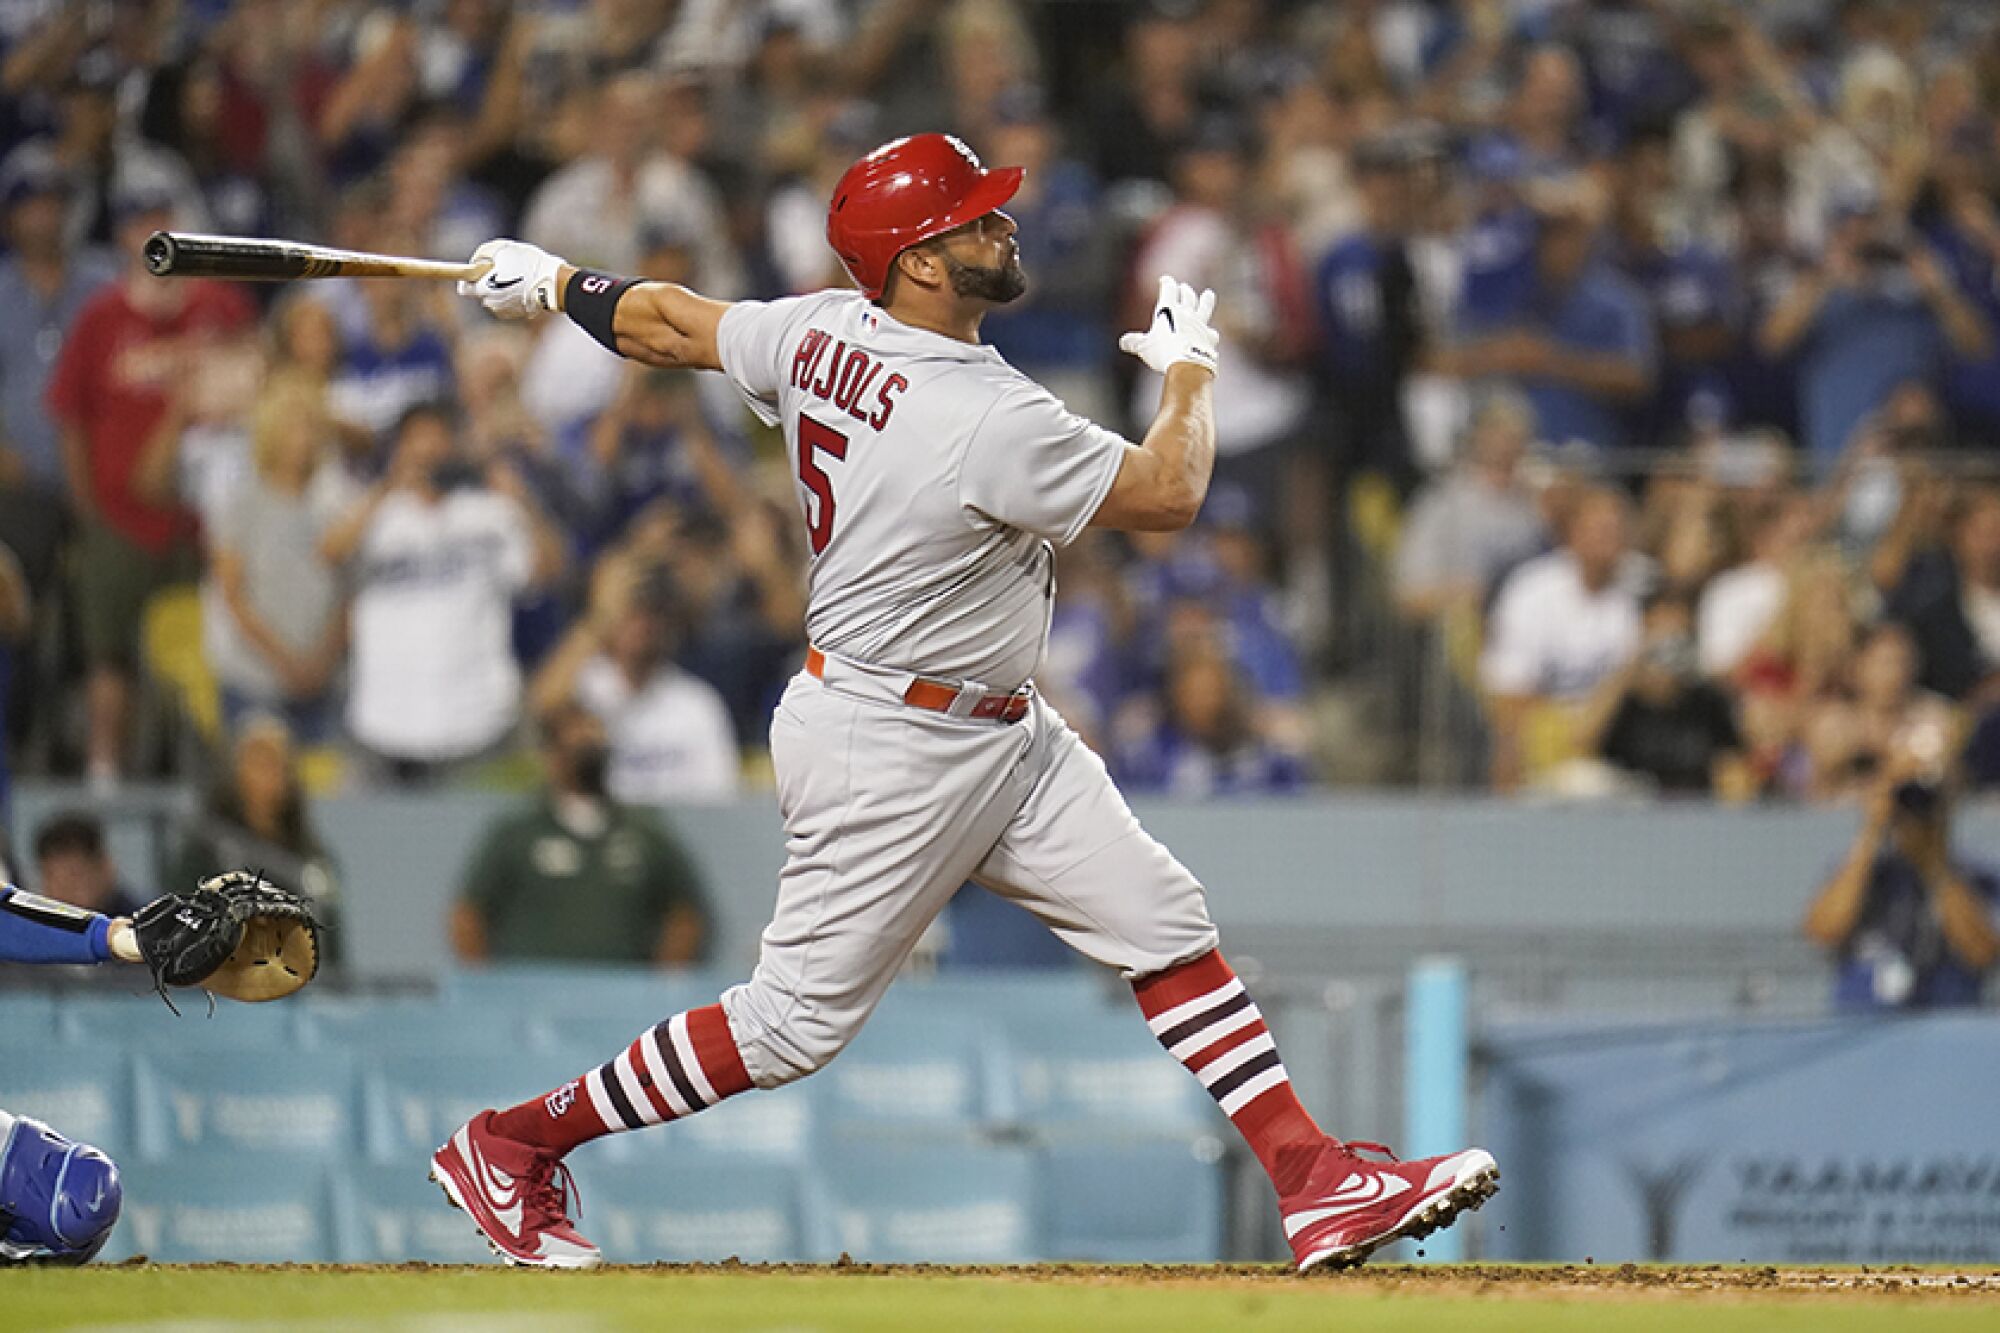 Albert Pujols scores his 700th career home run in the fourth inning on Friday.